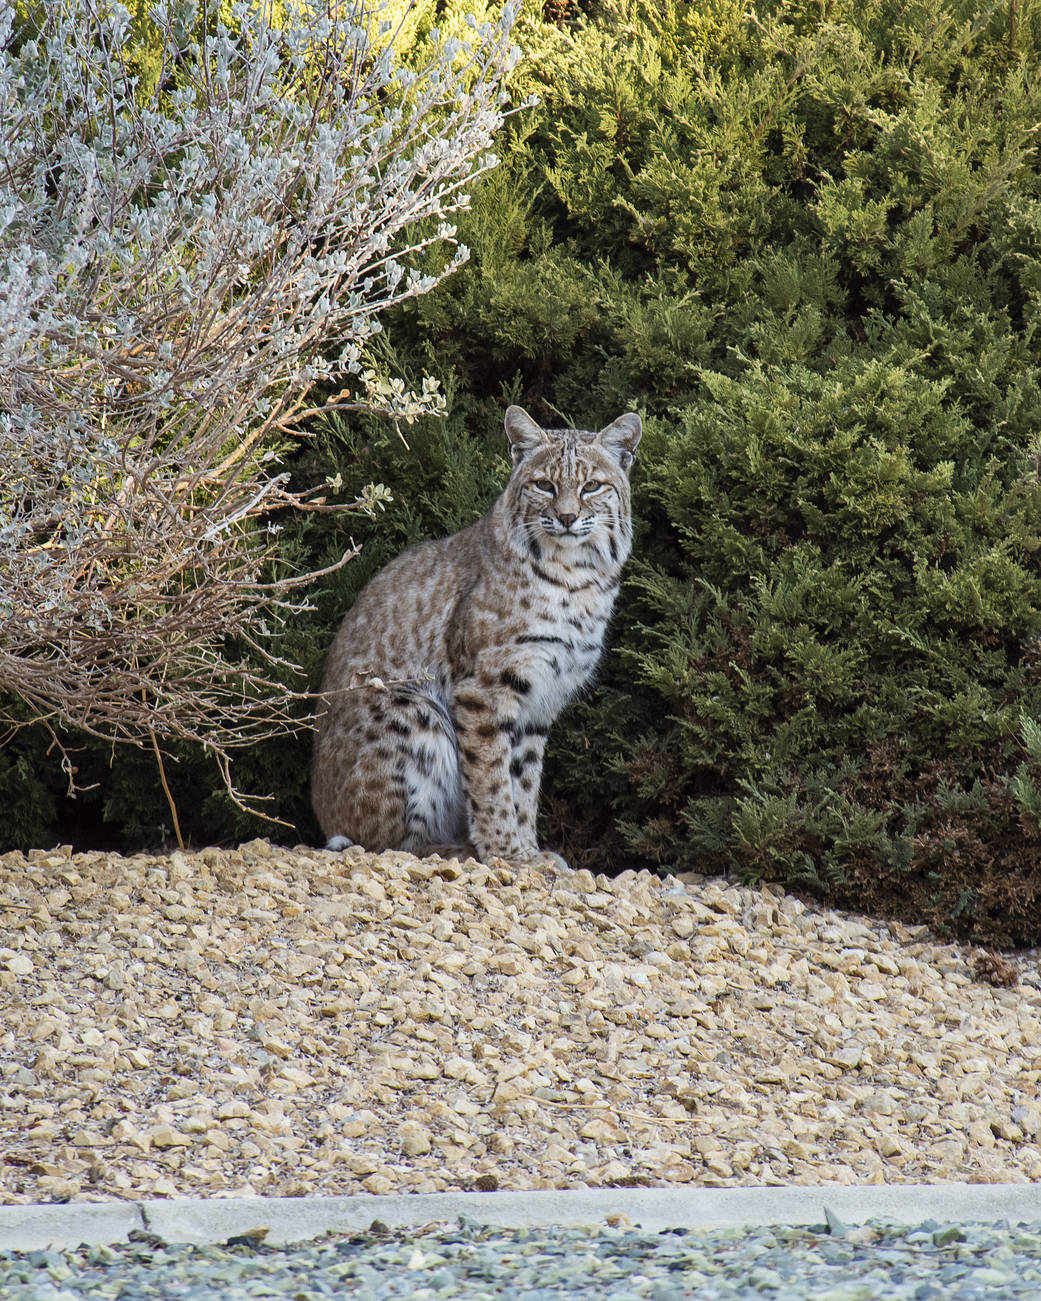 A bobcat surveying the landscape in between bushes at Armstrong Flight Research Center in Edwards, California. The spotted feline makes its home on the more than 300,000 acres of Mojave Desert surrounding the NASA facility housed at Edwards Air Force Base